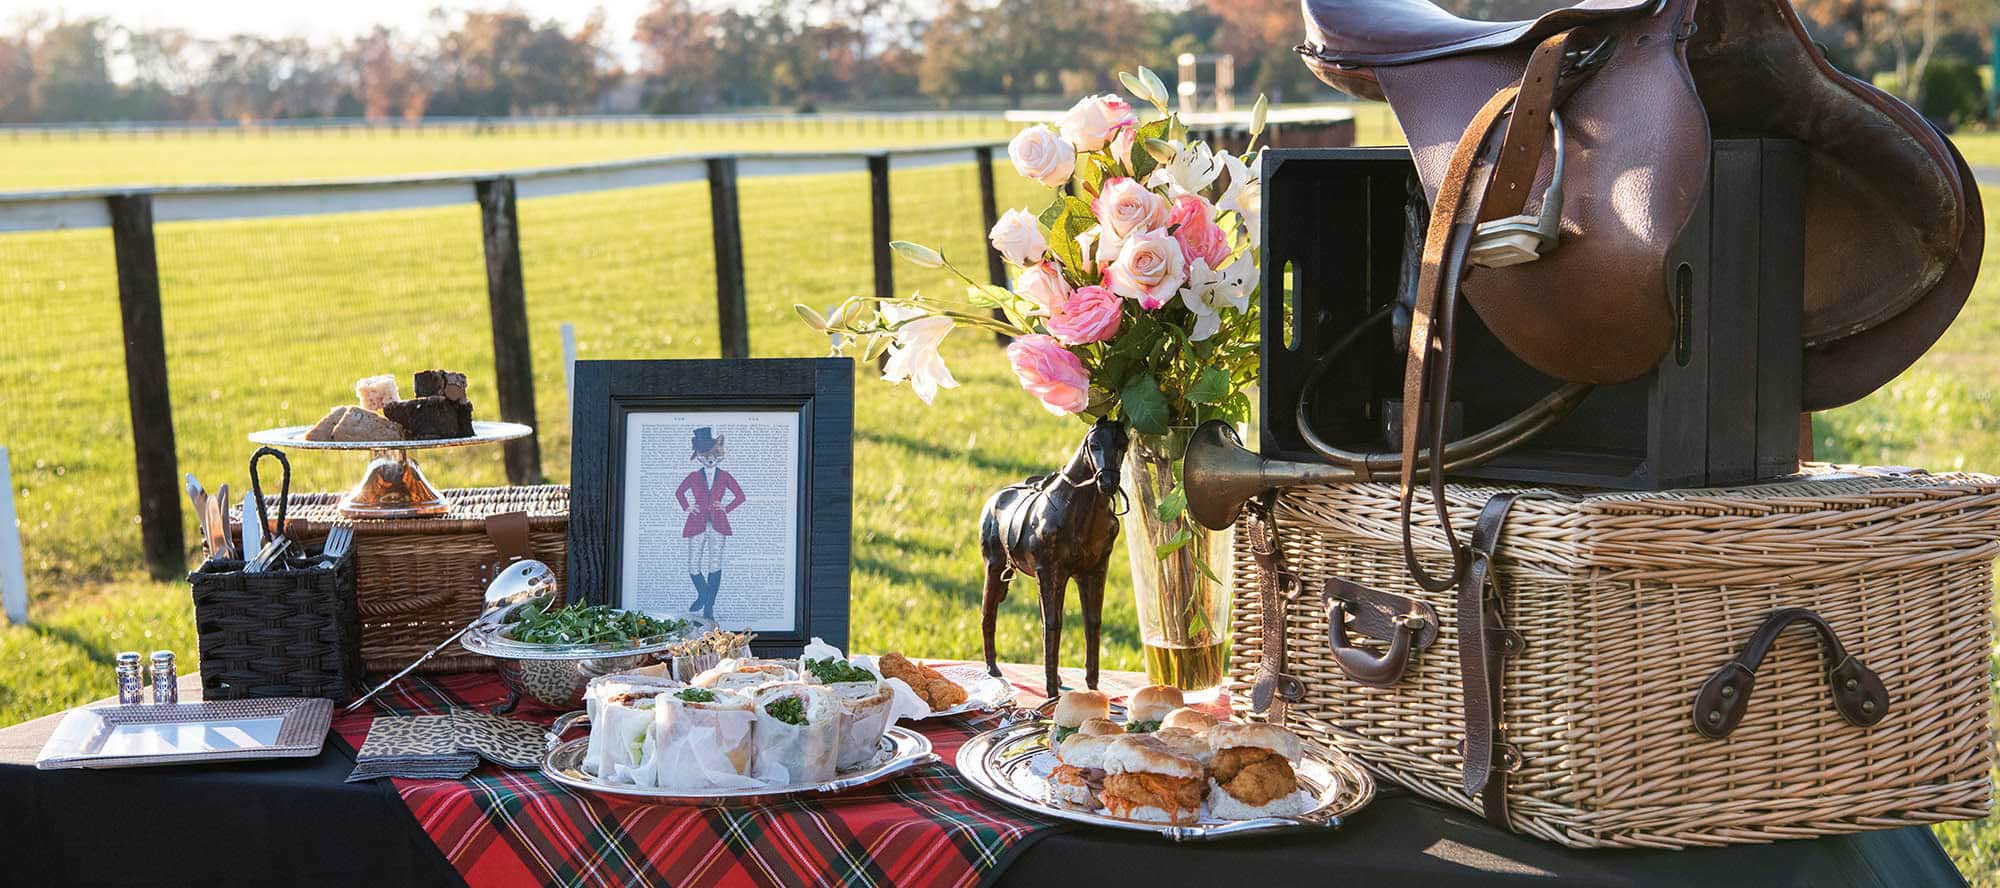 A tailgate spread at Foxfield Races with equestrian touches, silver and fresh flowers, Image by © R.L. Johnson for Wine & Country Life